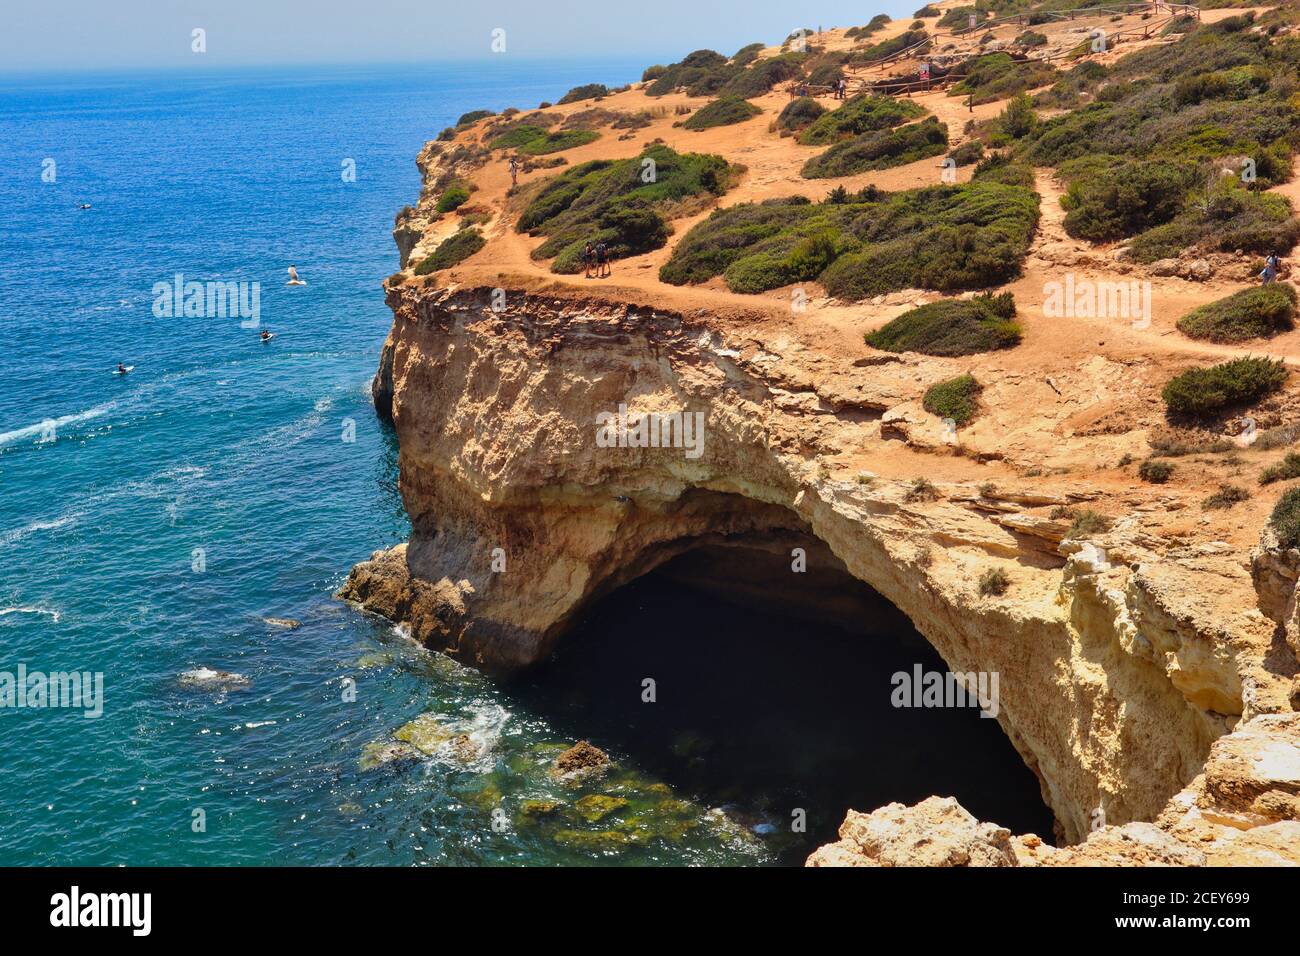 Benagil Cave Top View With Turquoise Atlantic Ocean. Spectacular View at Benagil Grotto from Above in Carvoeiro. Stock Photo